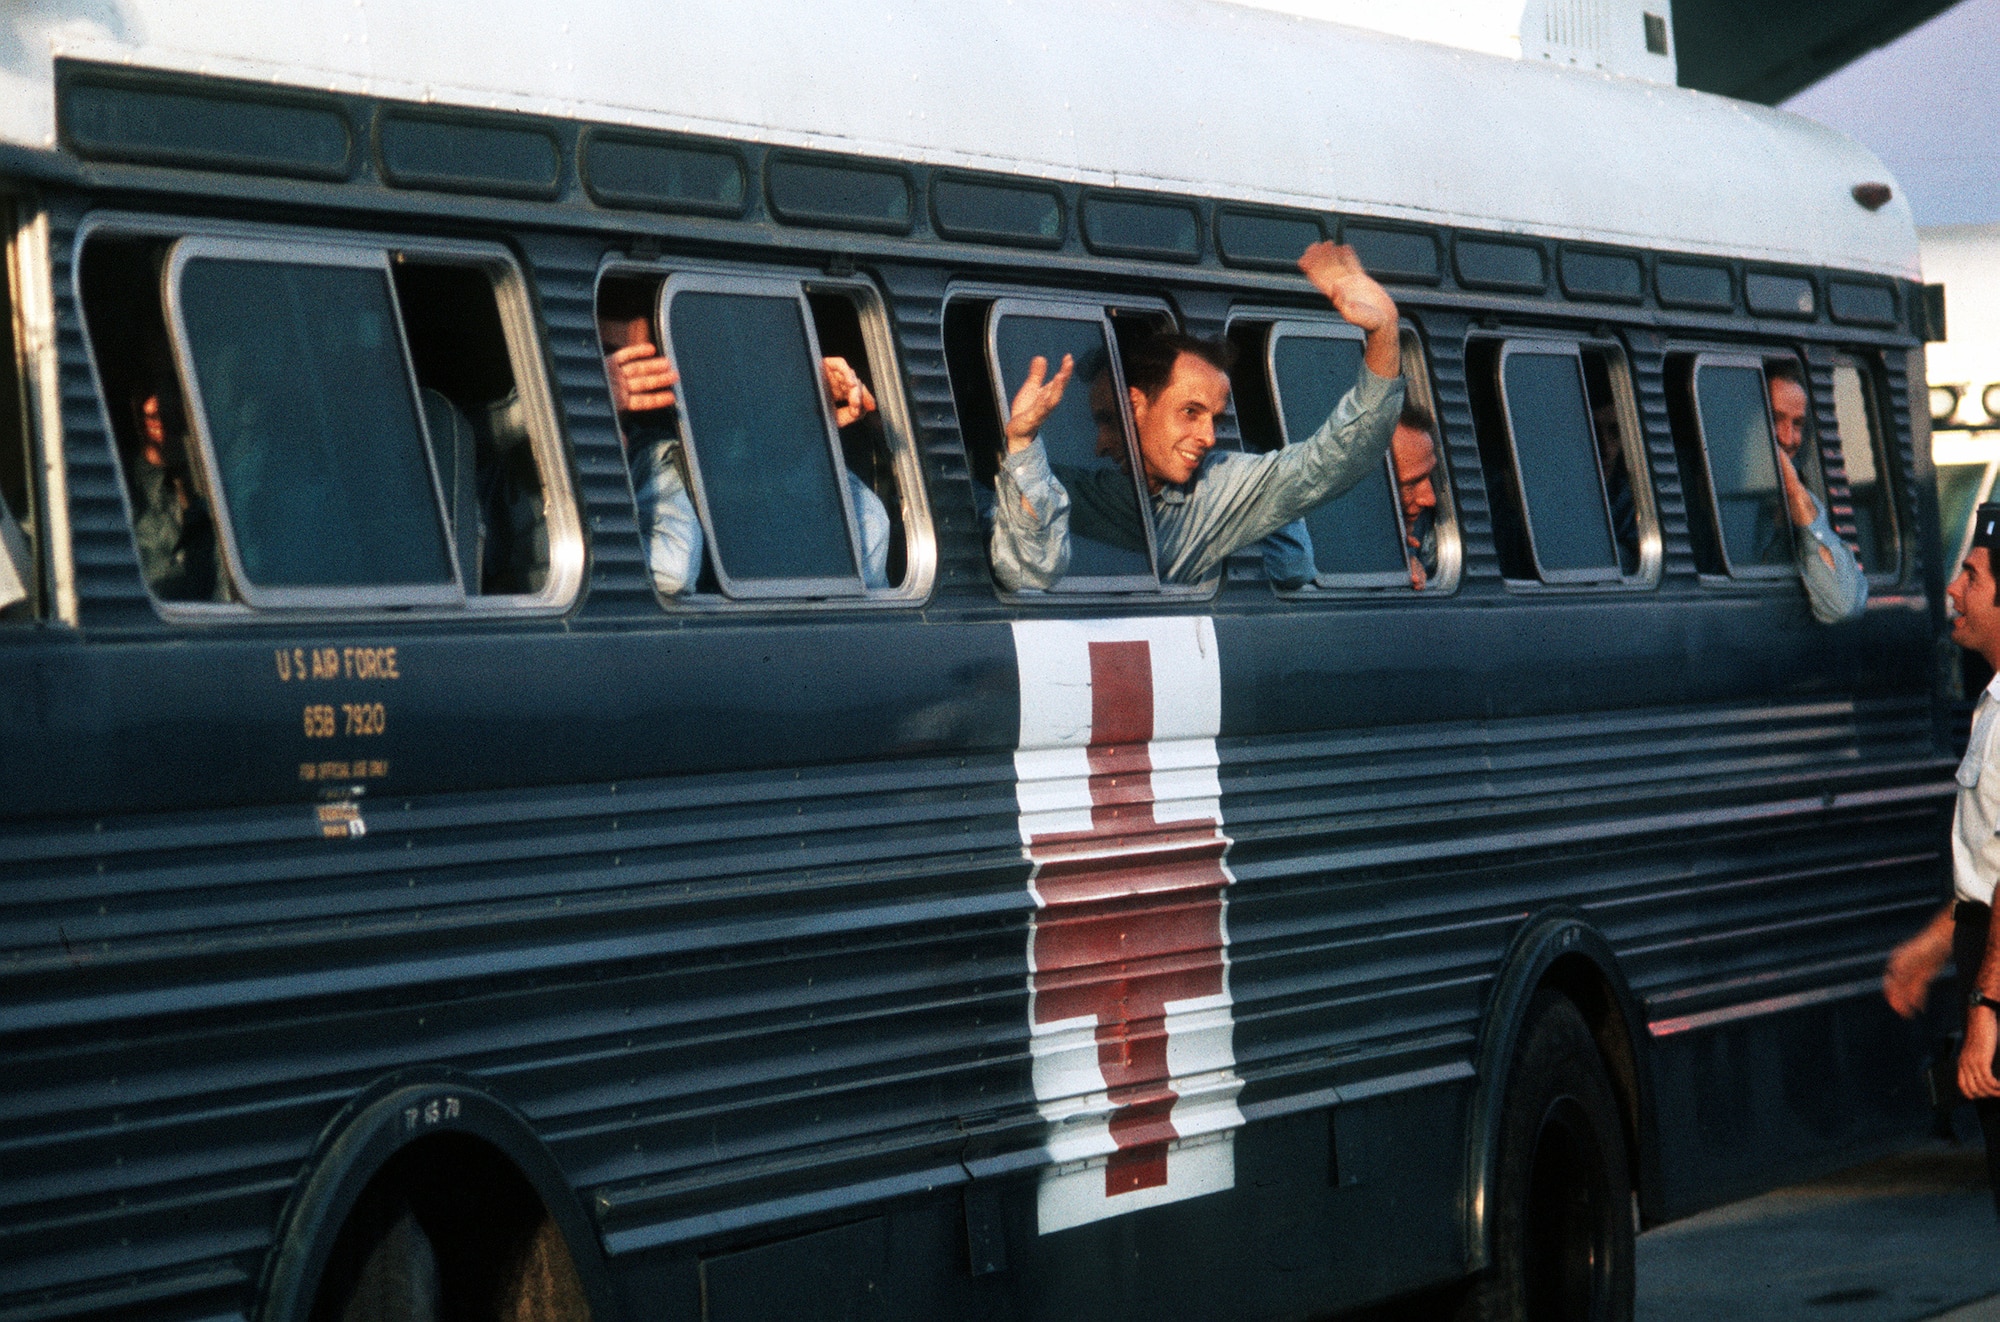 A returnee waves from a hospital bus at Clark Air Base shortly after being released from a prisoner of war camp in Vietnam. (DoD Photo)